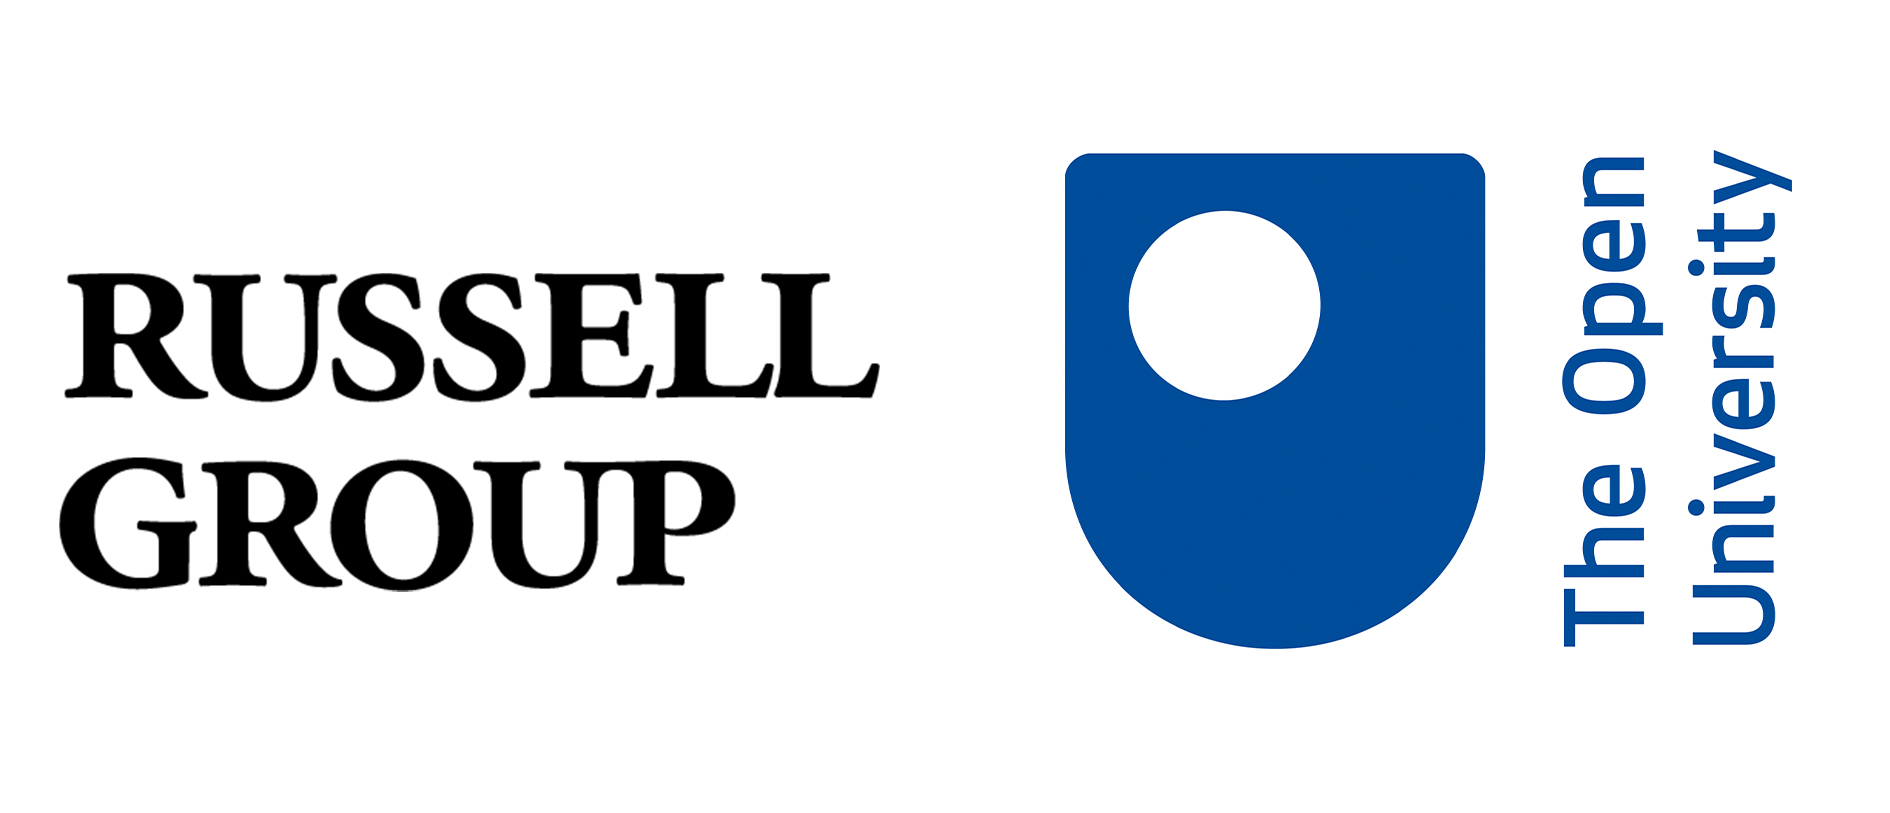 Russell group and OU logo